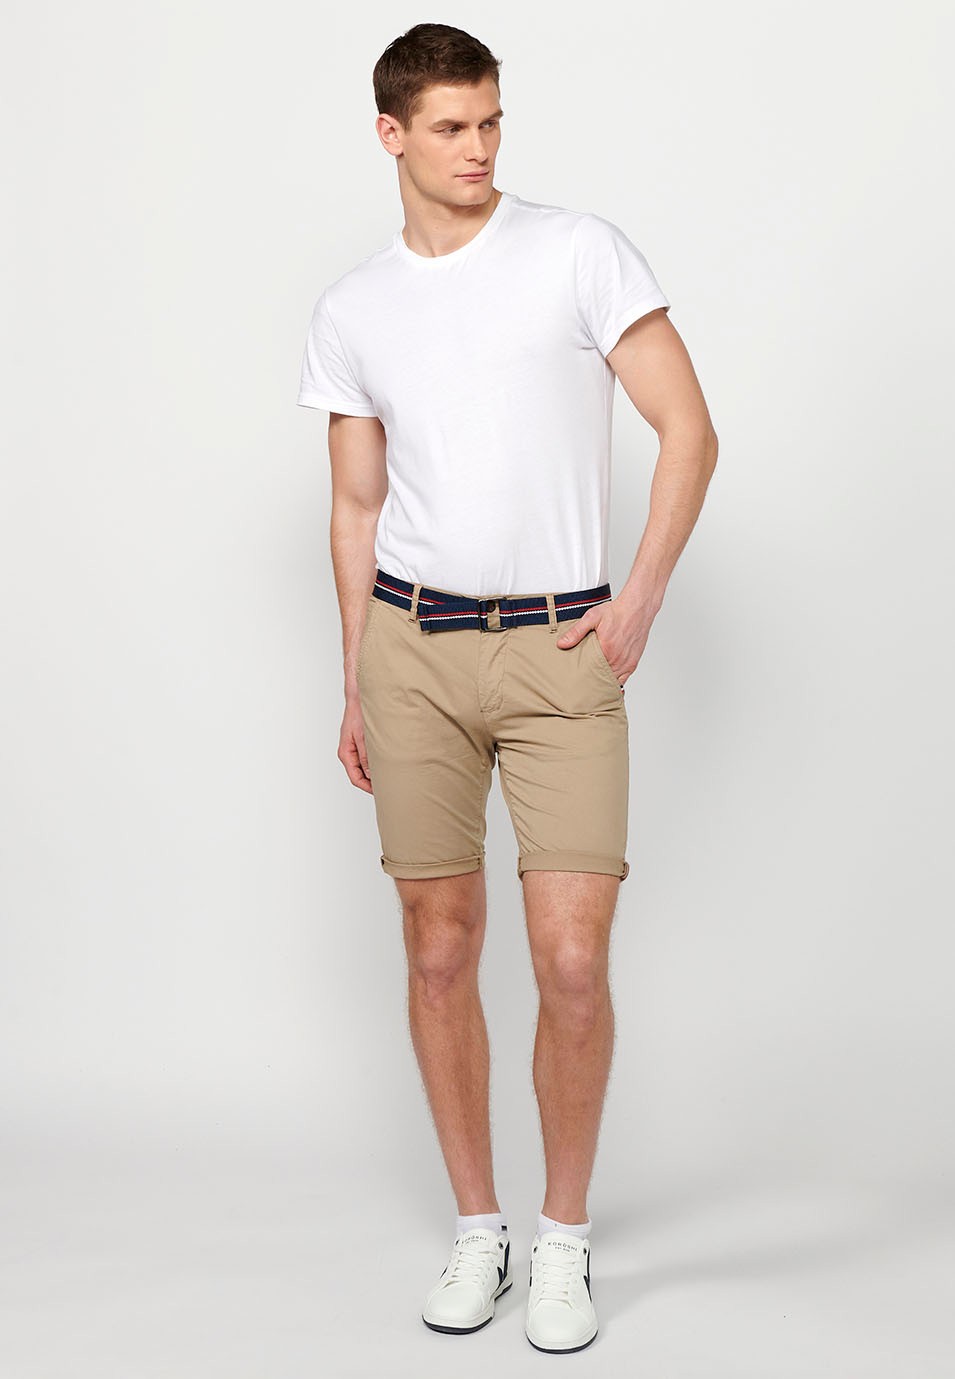 Shorts with a turn-up finish with front closure with zipper and button and belt in Beige Color for Men